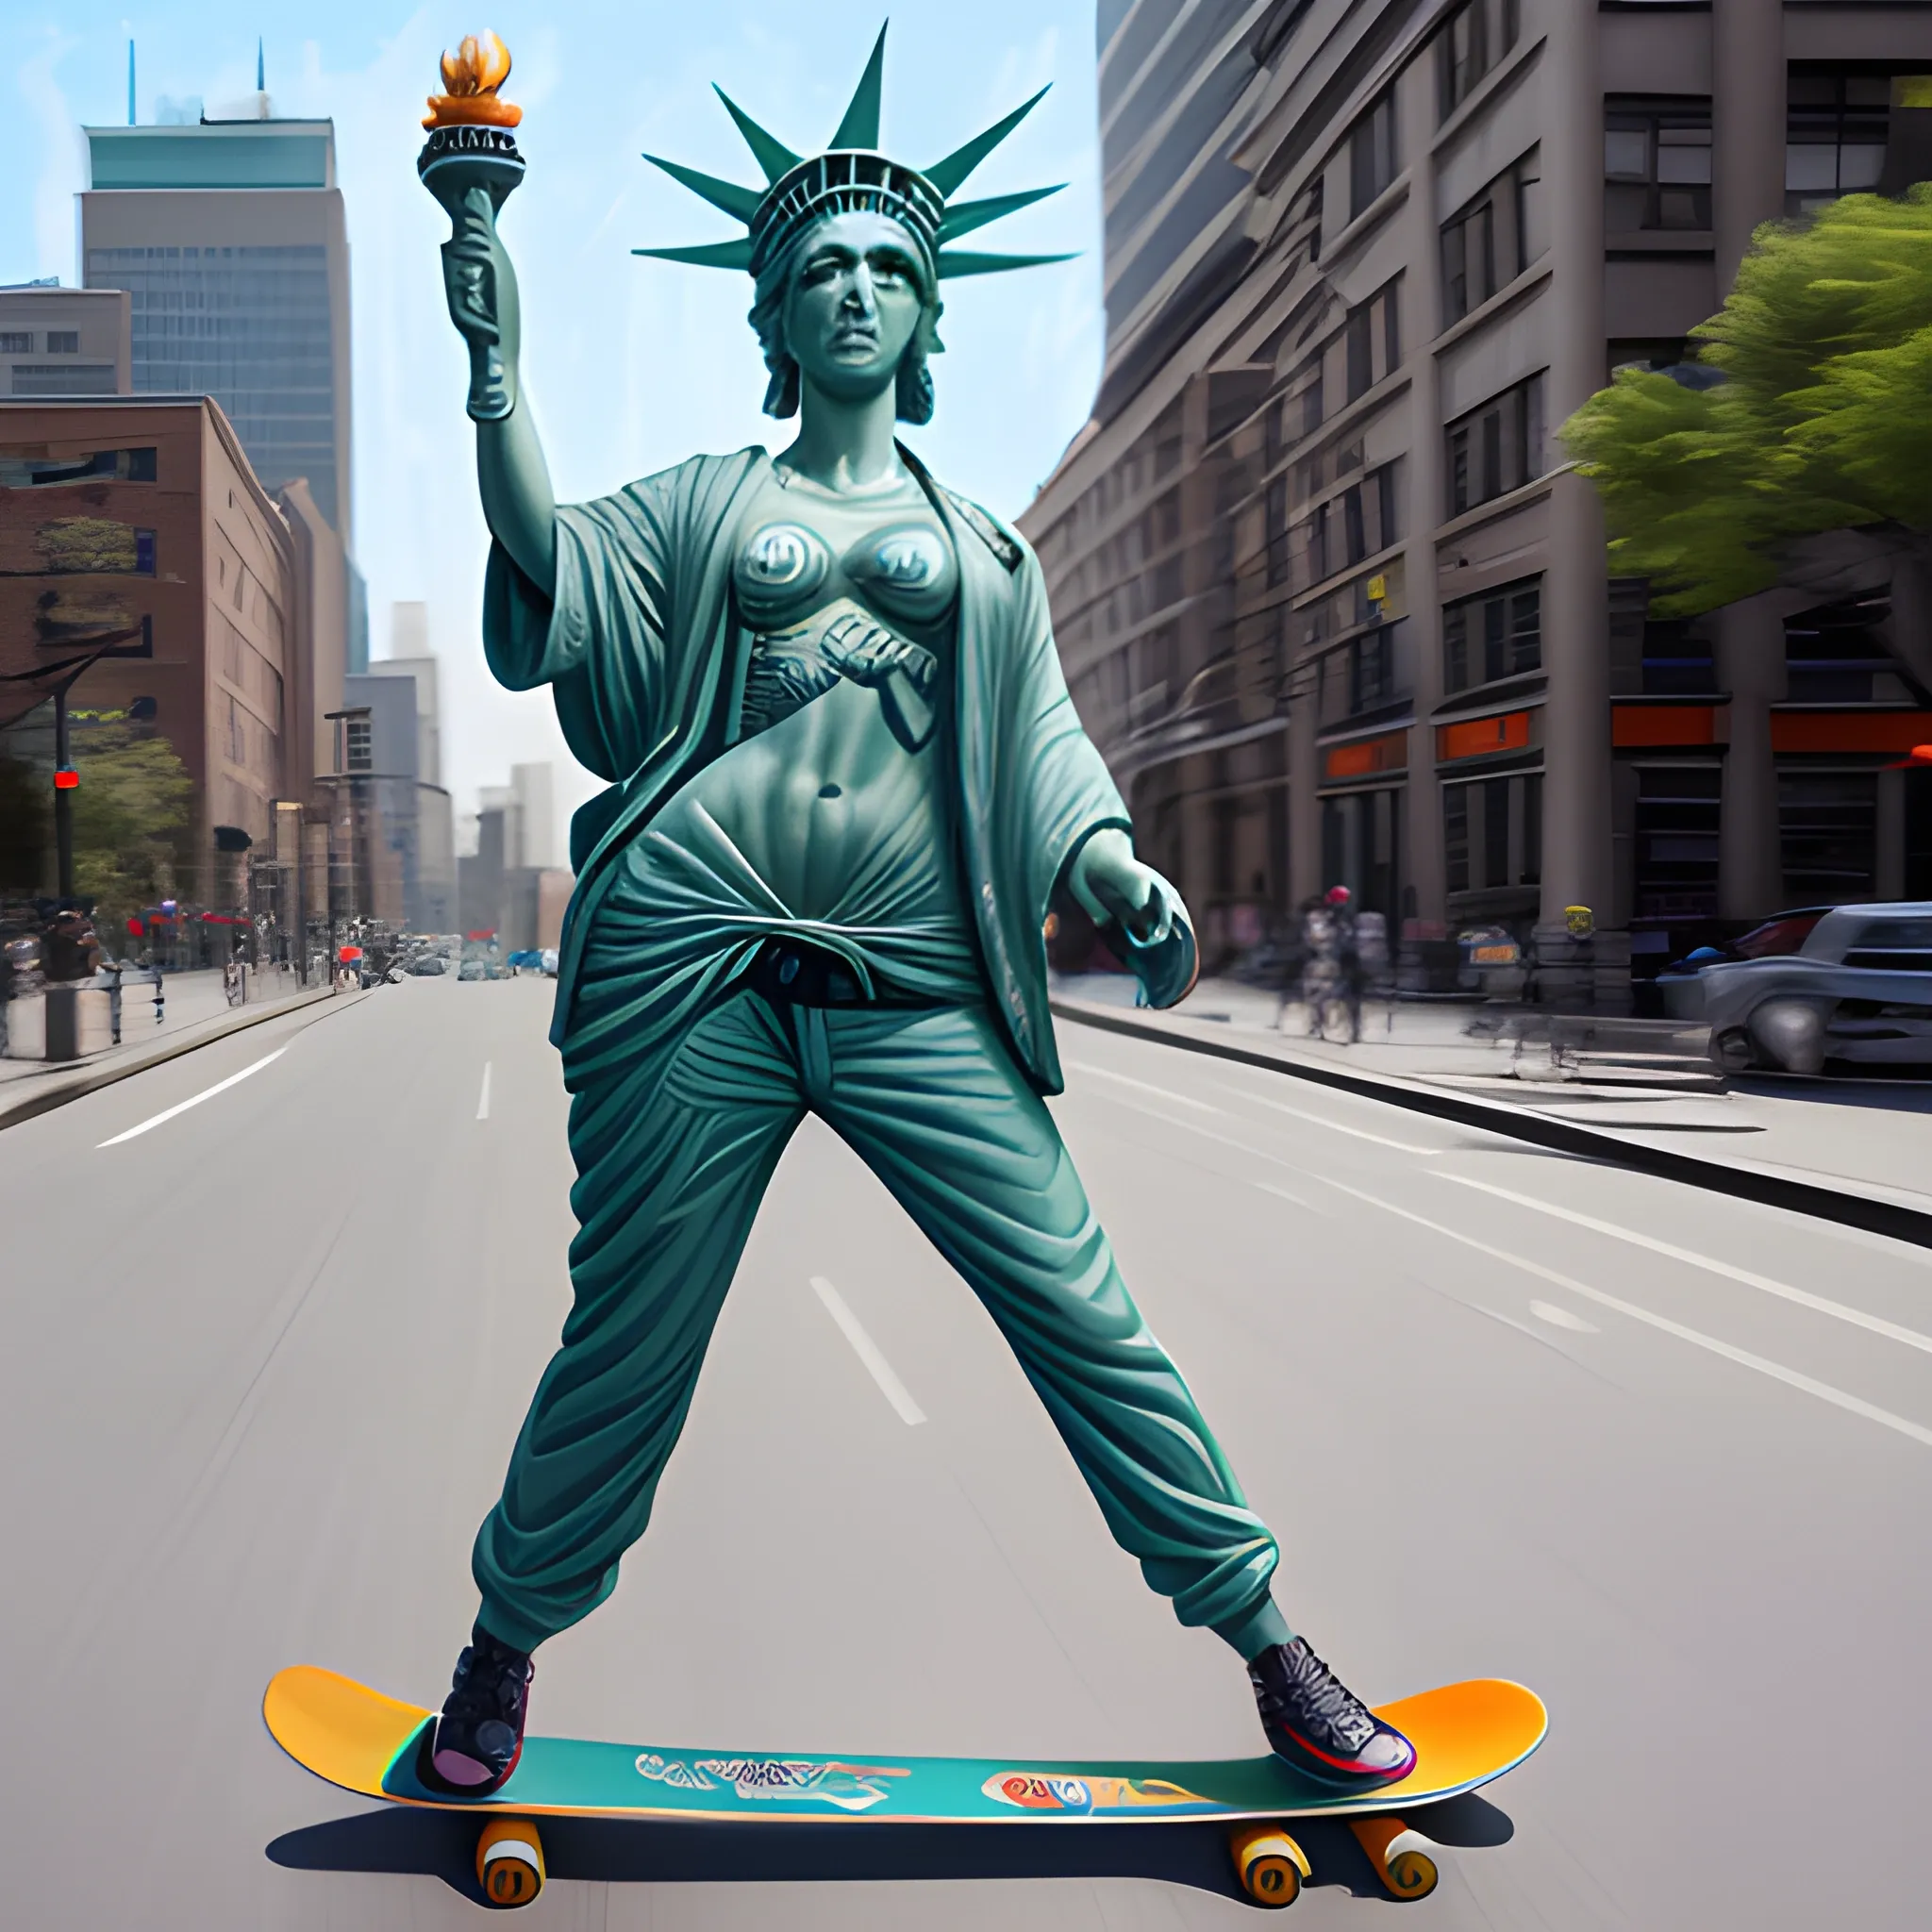 Side motion view of an androgynous Statue of Liberty riding a skateboard down an urban street, with a mohawk hairstyle, smoking a joint, carrying a gun, and wearing a Bitcoin half-shirt, photo realistic oil painting